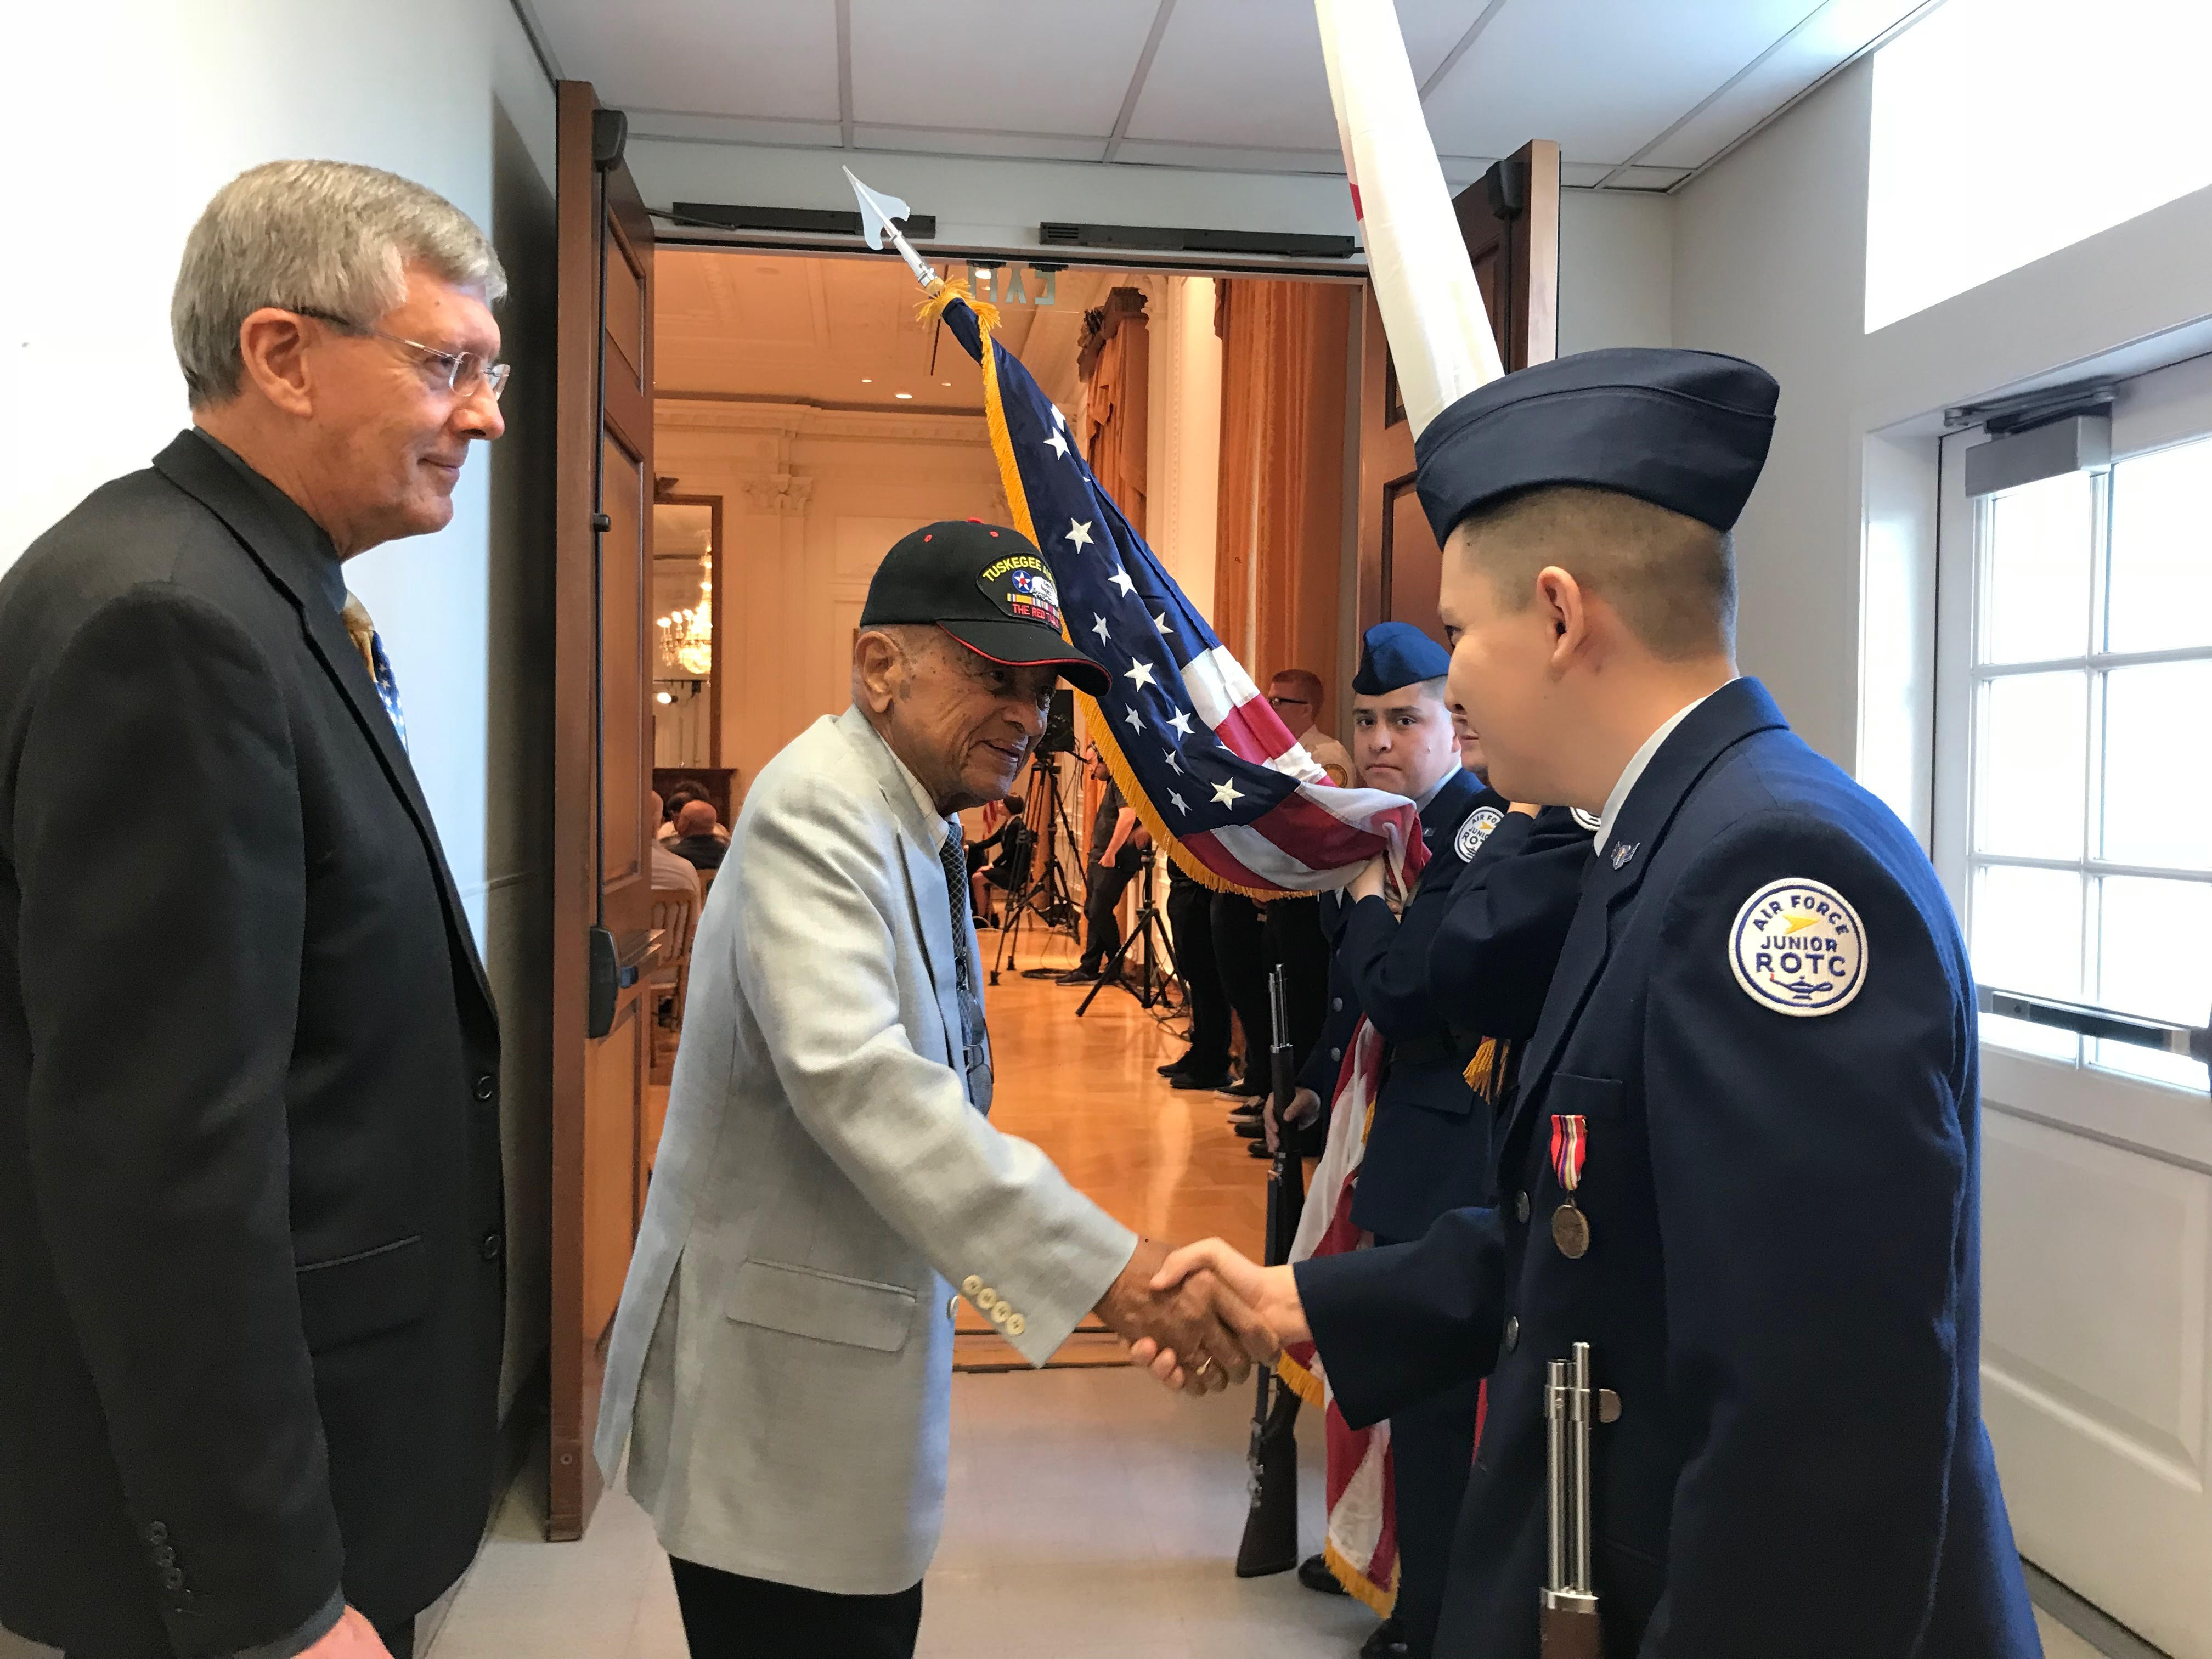 Event Recap: Tuskegee Airman Honored at the Nixon Library